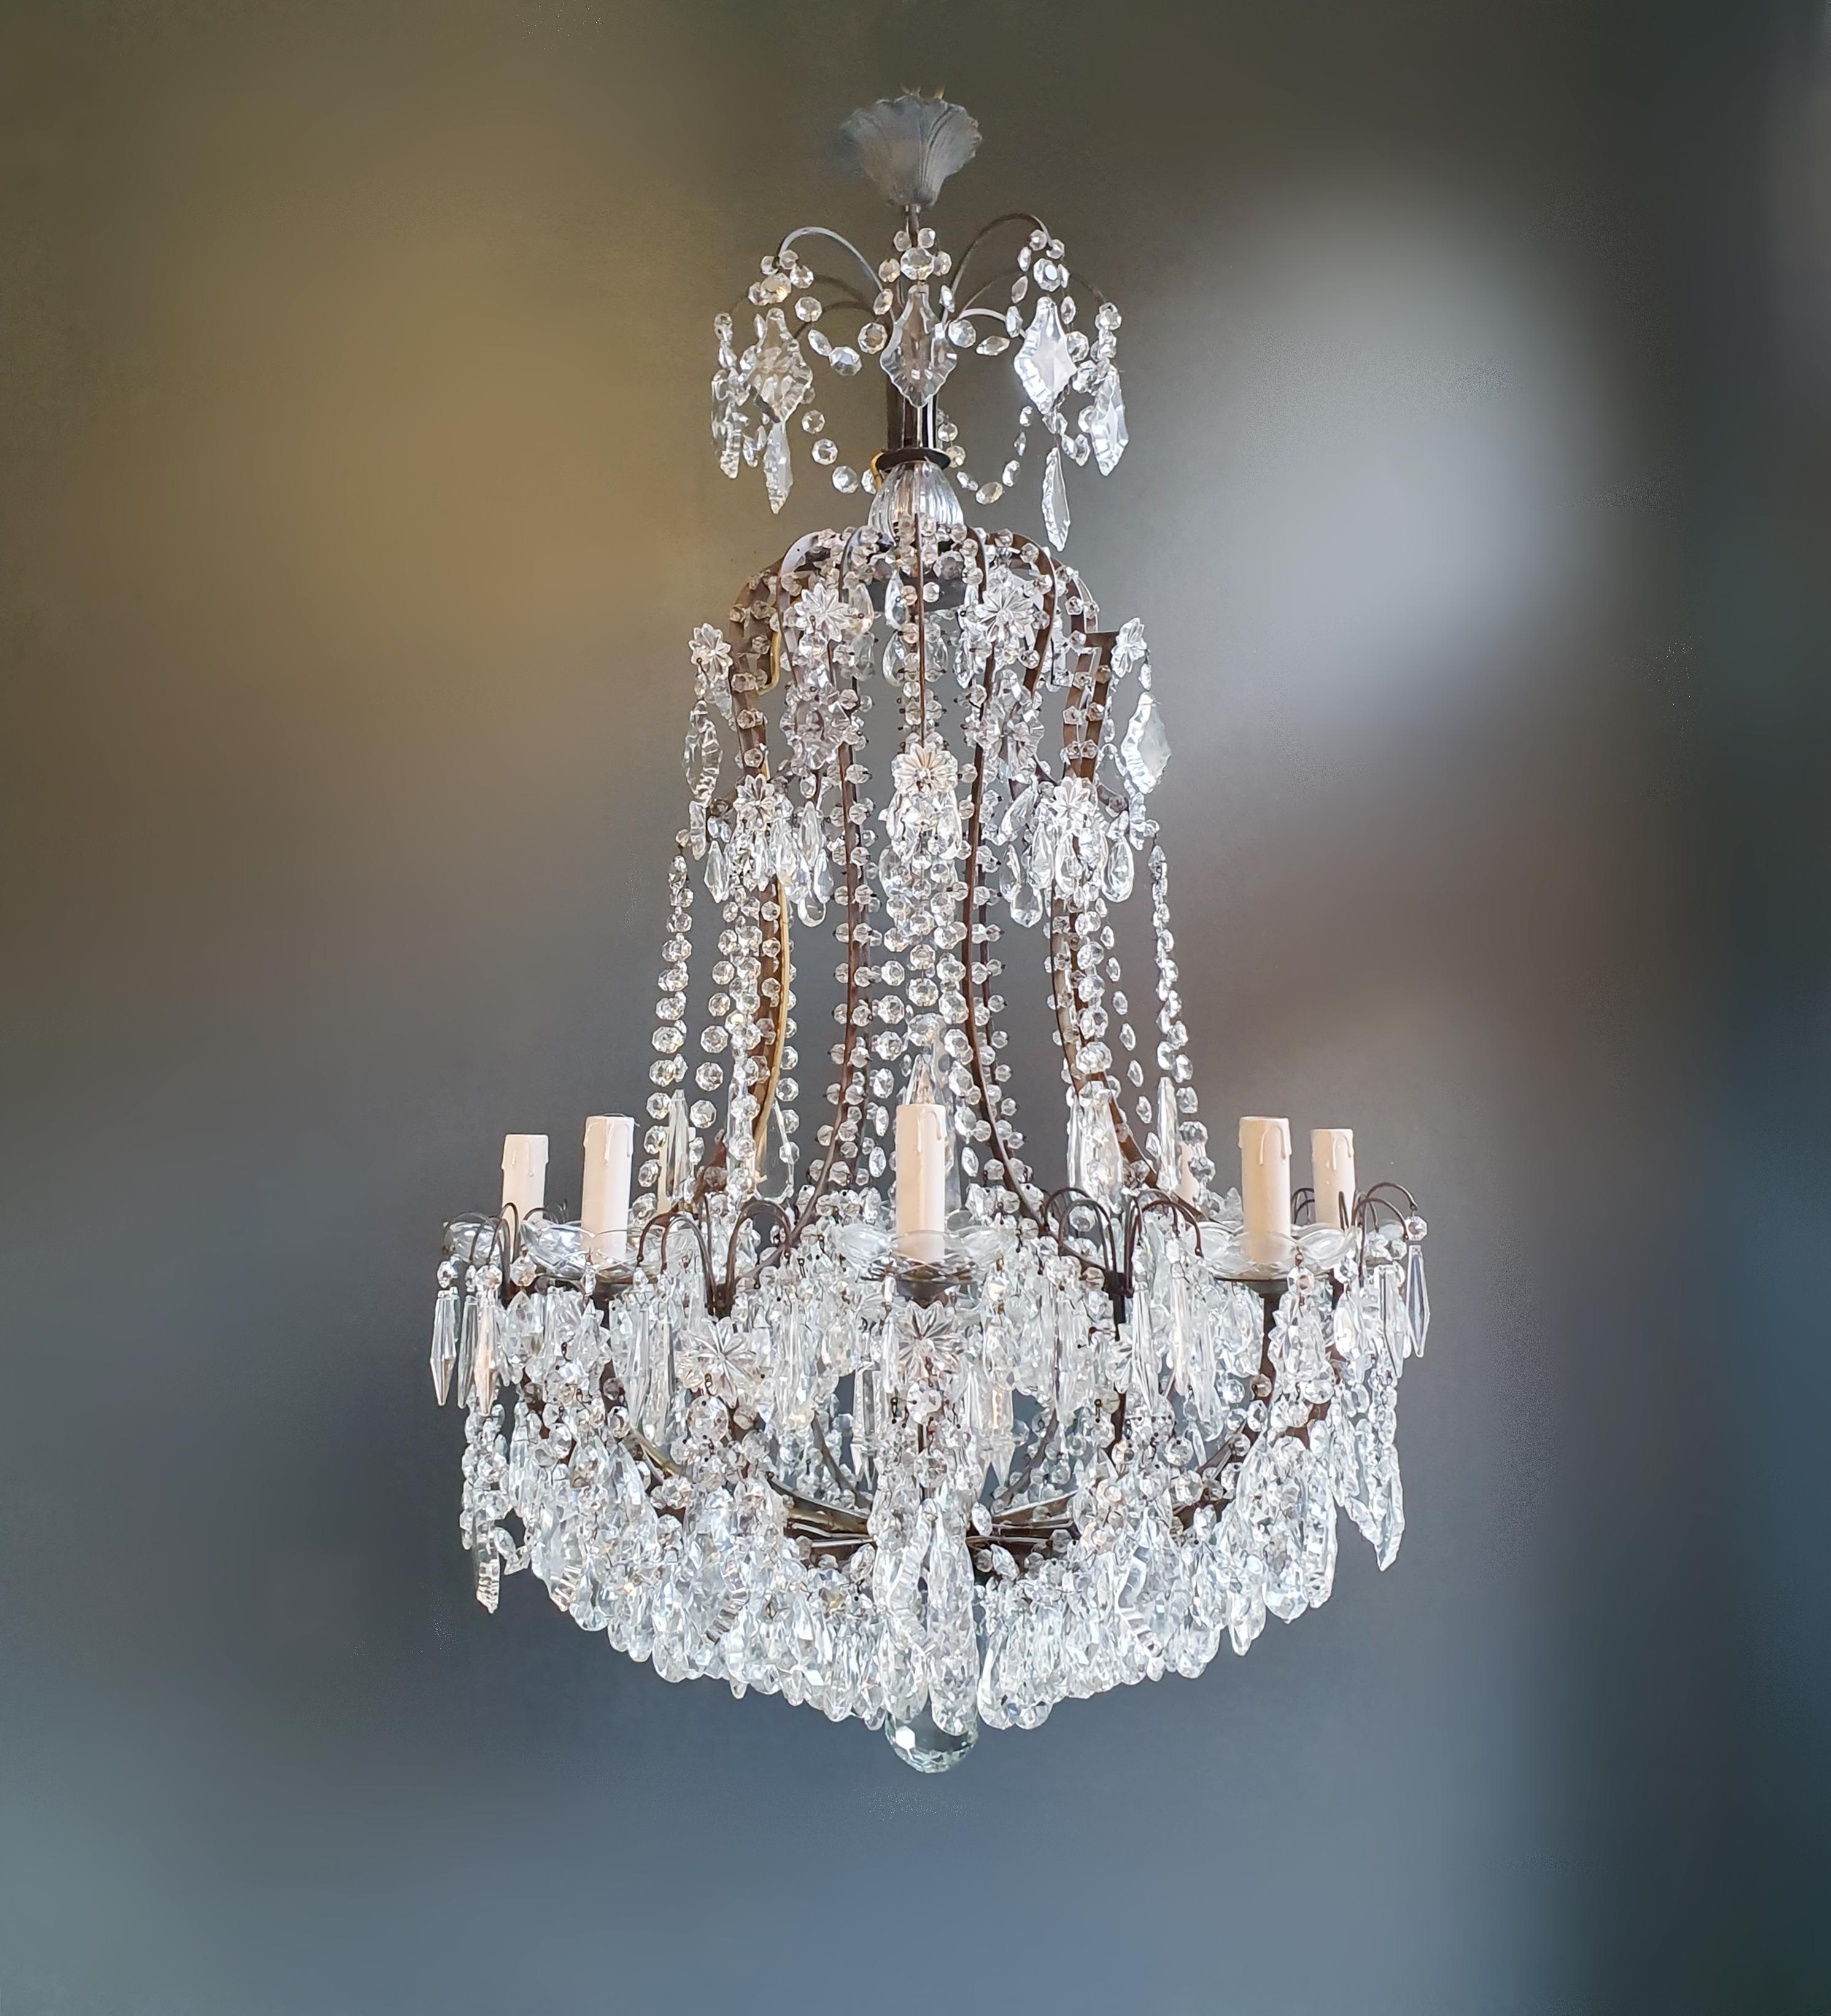 **Exquisite Chandelier - Lovingly Restored and Professionally Enhanced in Berlin**

Presenting a captivating chandelier that seamlessly combines timeless elegance with modern functionality. This chandelier, an exquisite piece of artistry, has been